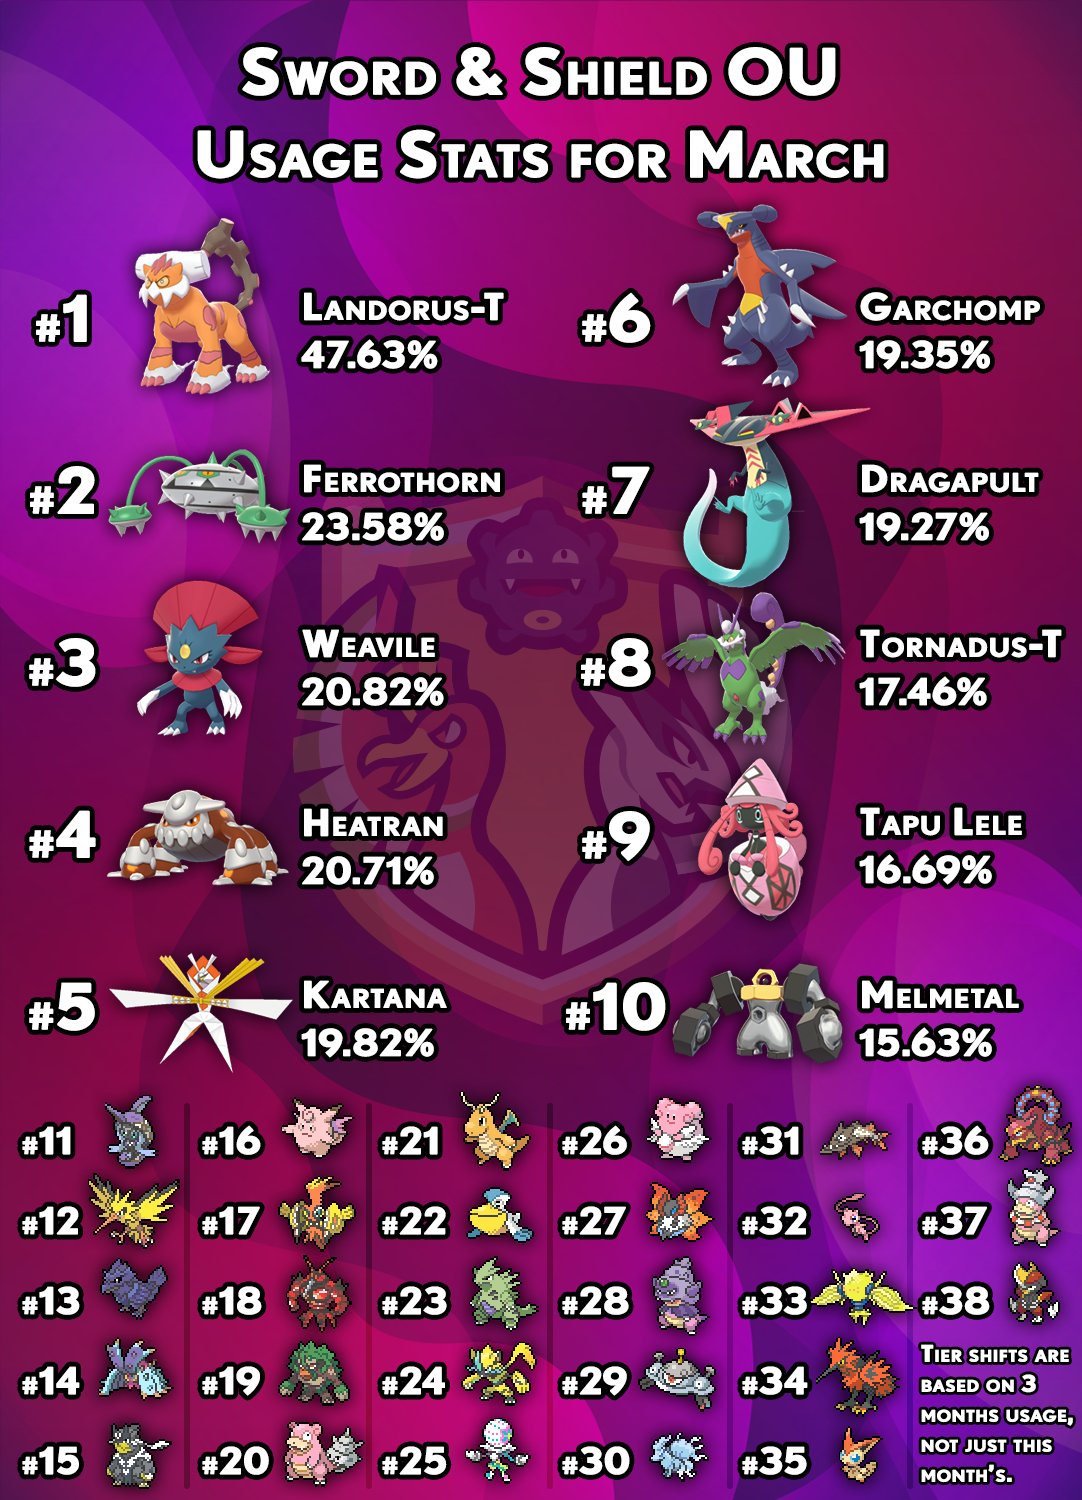 Smogon University - These are the most popular Pokemon in each metagame!  The rightmost column shows the Pokemon with the biggest increase and  decrease in usage from February to March--Incineroar in particular